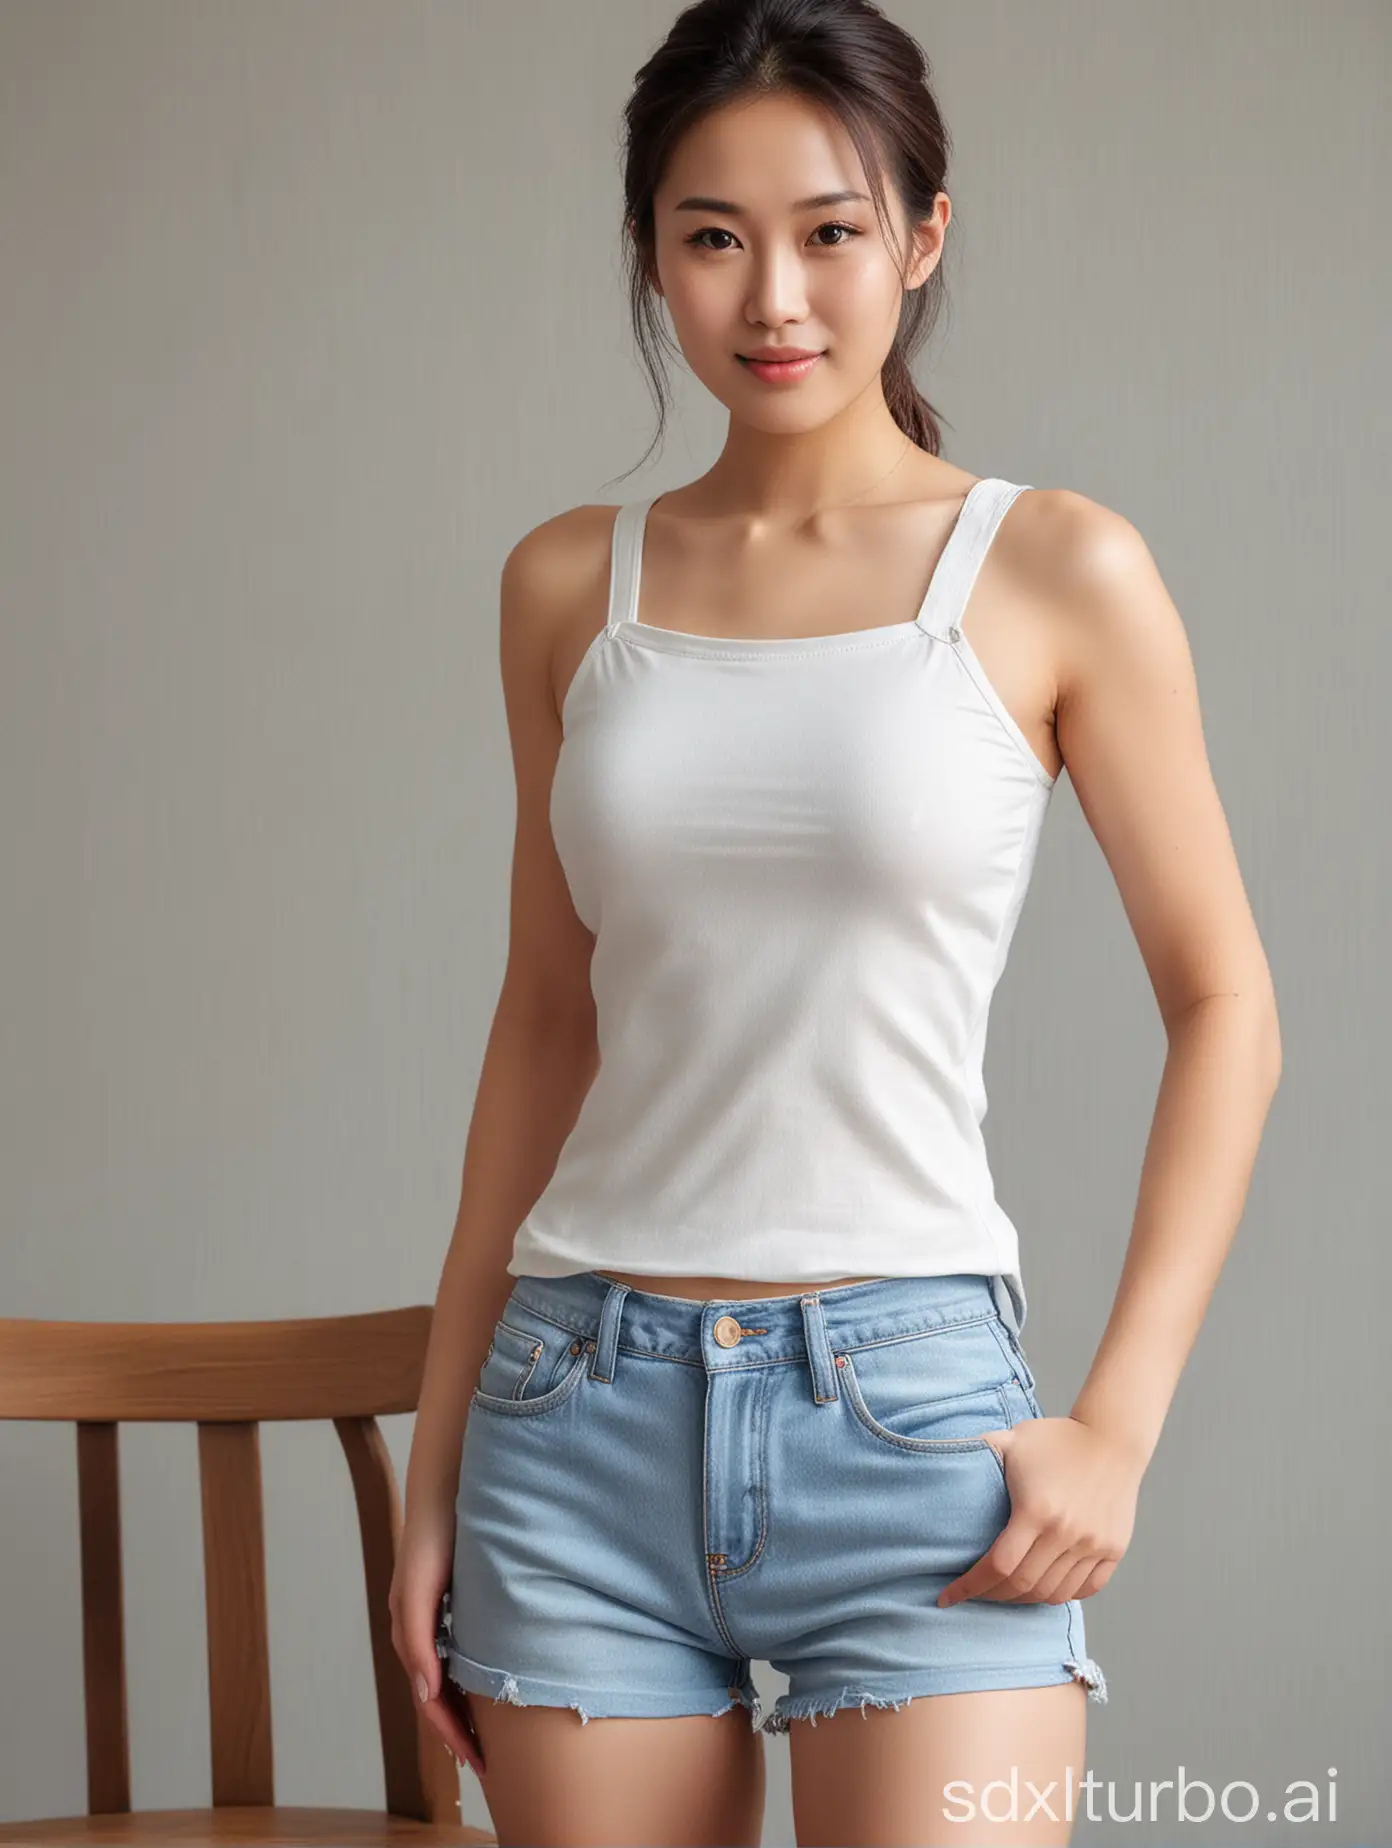 32 year old Chinese woman, 173 cm tall, 68 kg weight, attractive and beautiful facial features, fair skin, tall and slim figure, well-defined curves, has a little bit of abs, perfect hourglass figure, golden ratio body shape, medium length hair, diagonal French braid, white sleeveless top, light blue denim short pants, bare legs with black high heels with red bottom